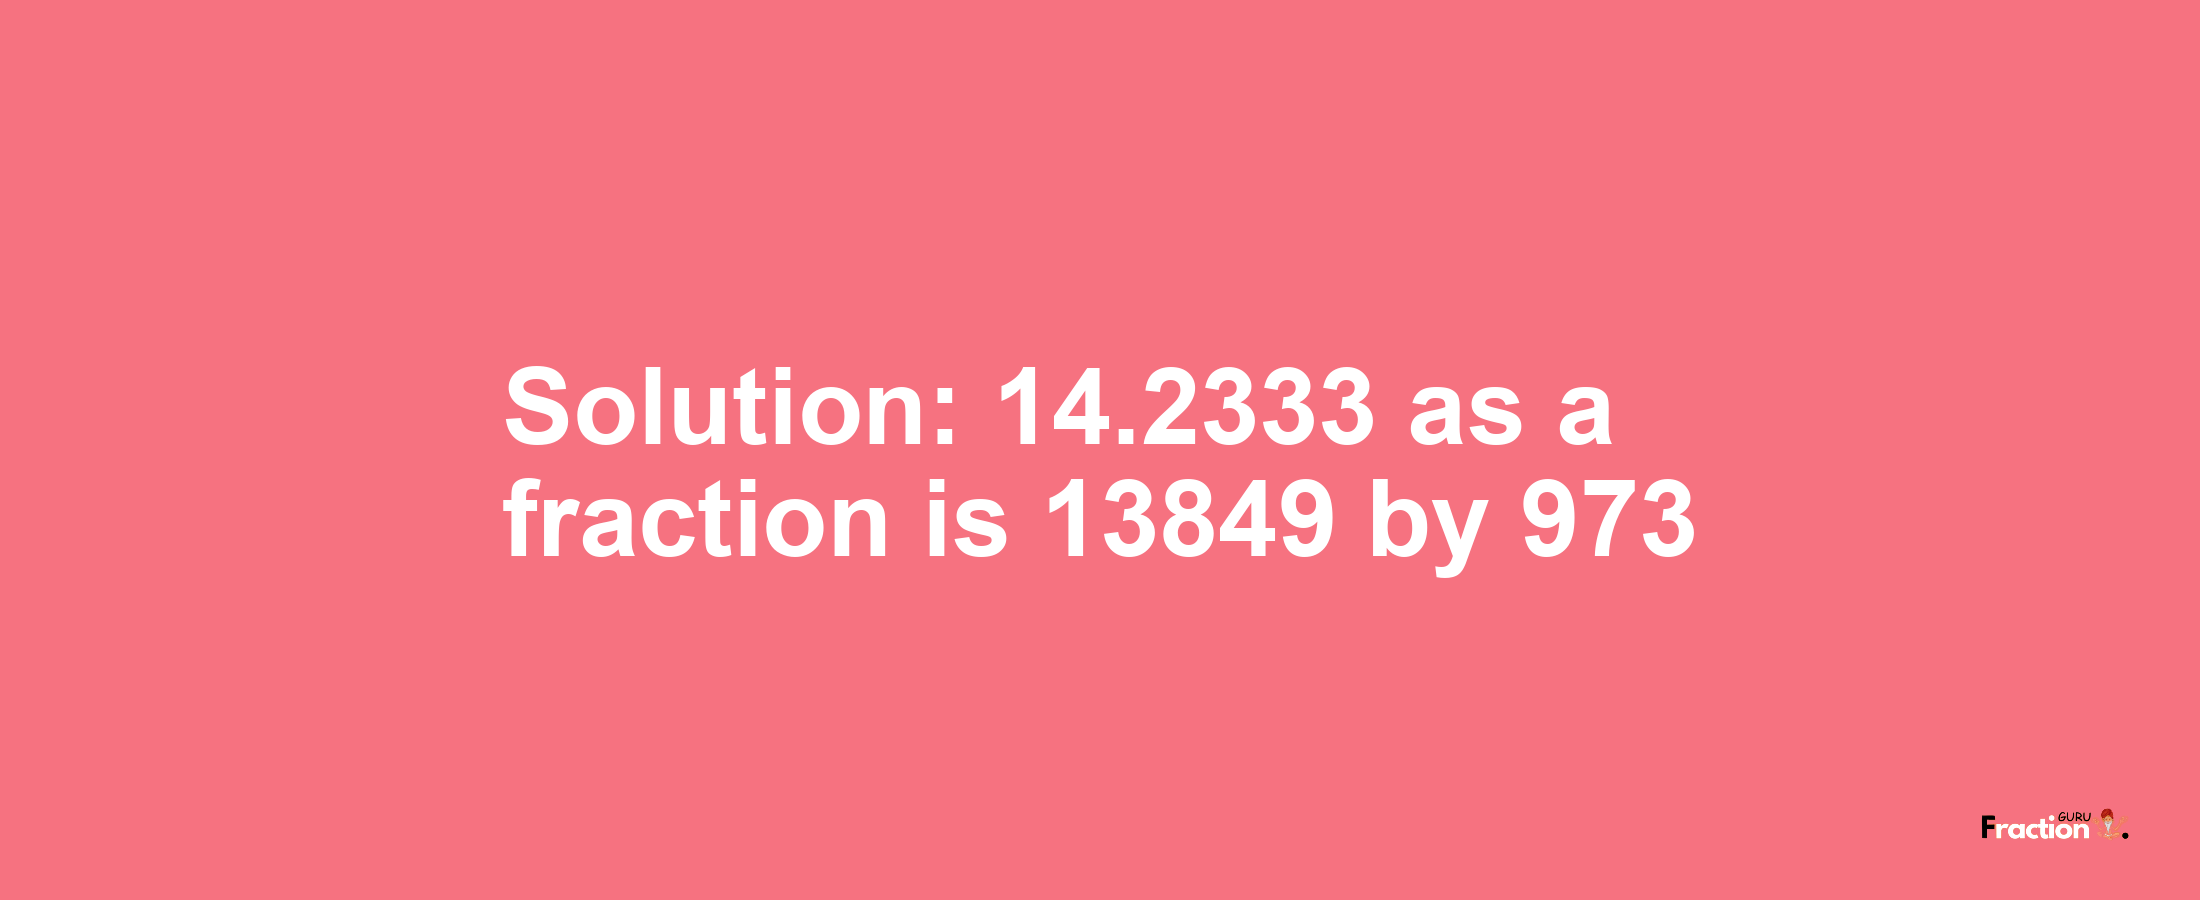 Solution:14.2333 as a fraction is 13849/973